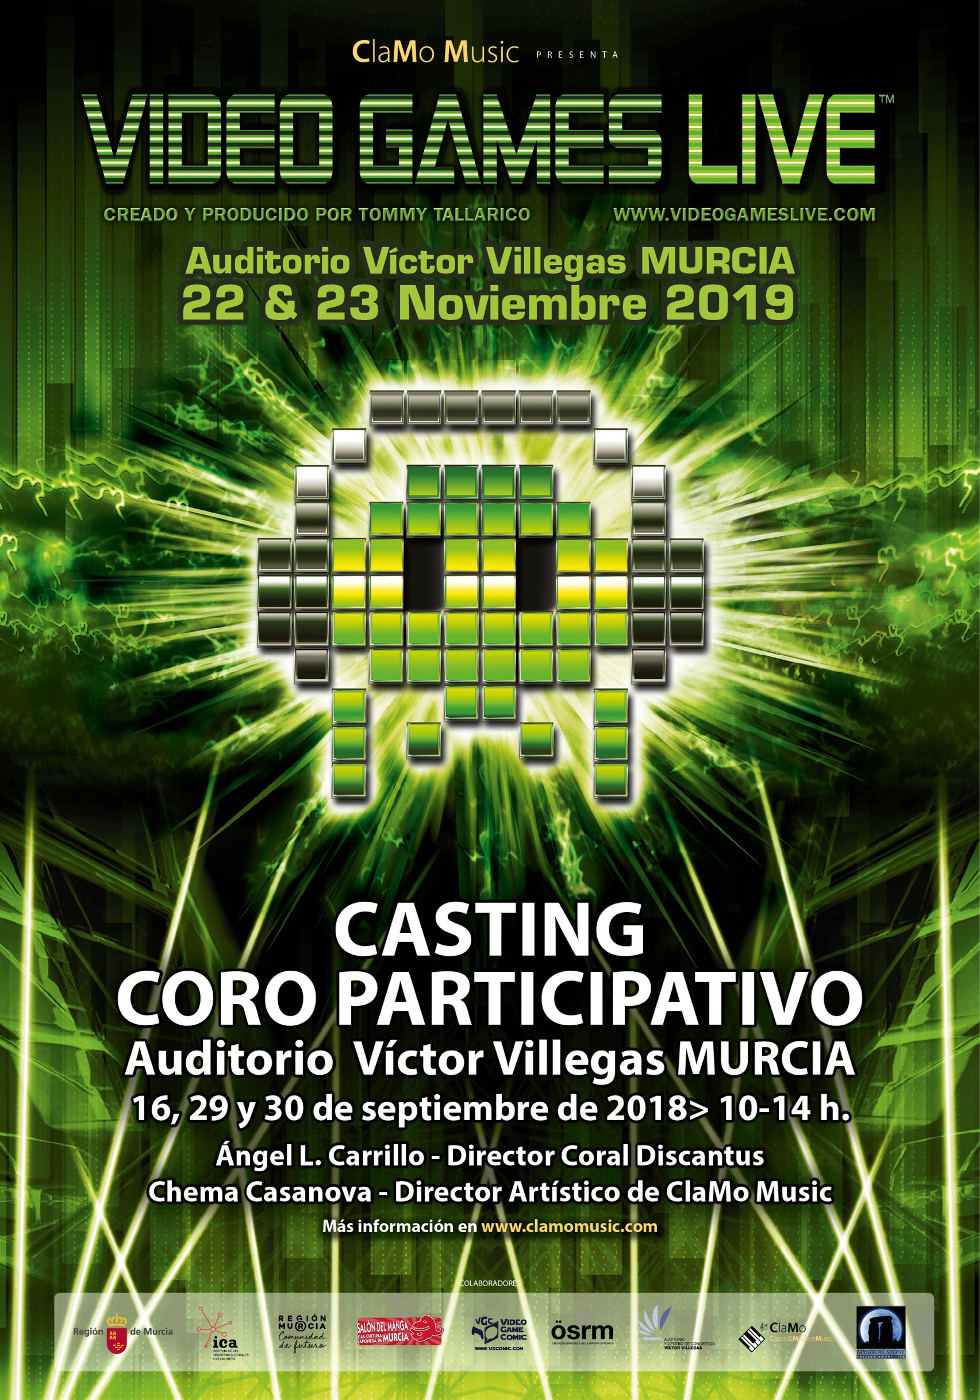 Casting for the Video Games Live Chorus in Murcia